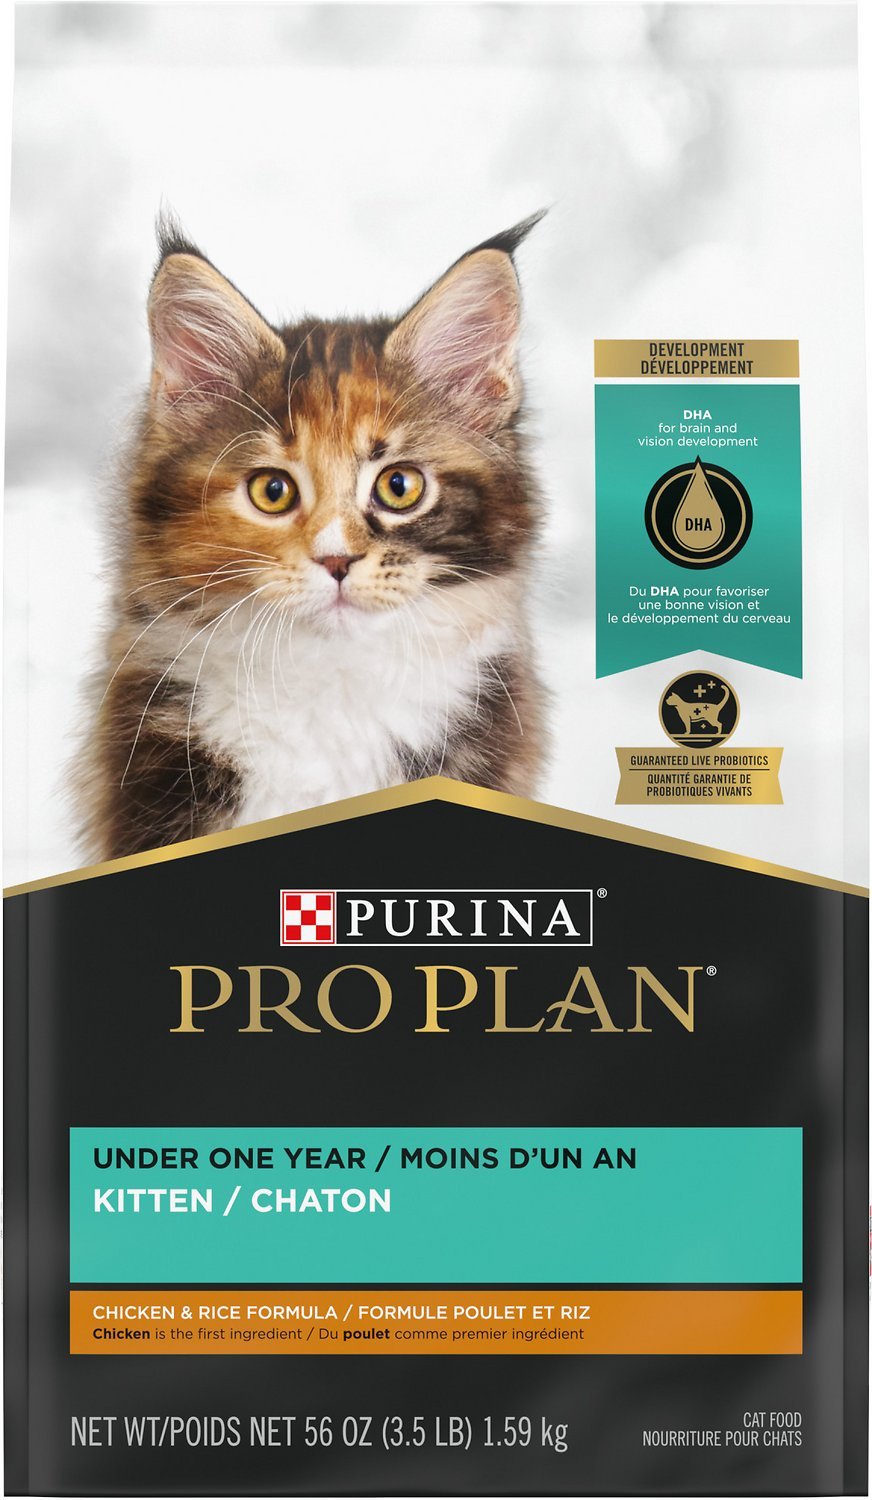 Purina Pro Plan Kitten Chicken & Rice Dry Food Review